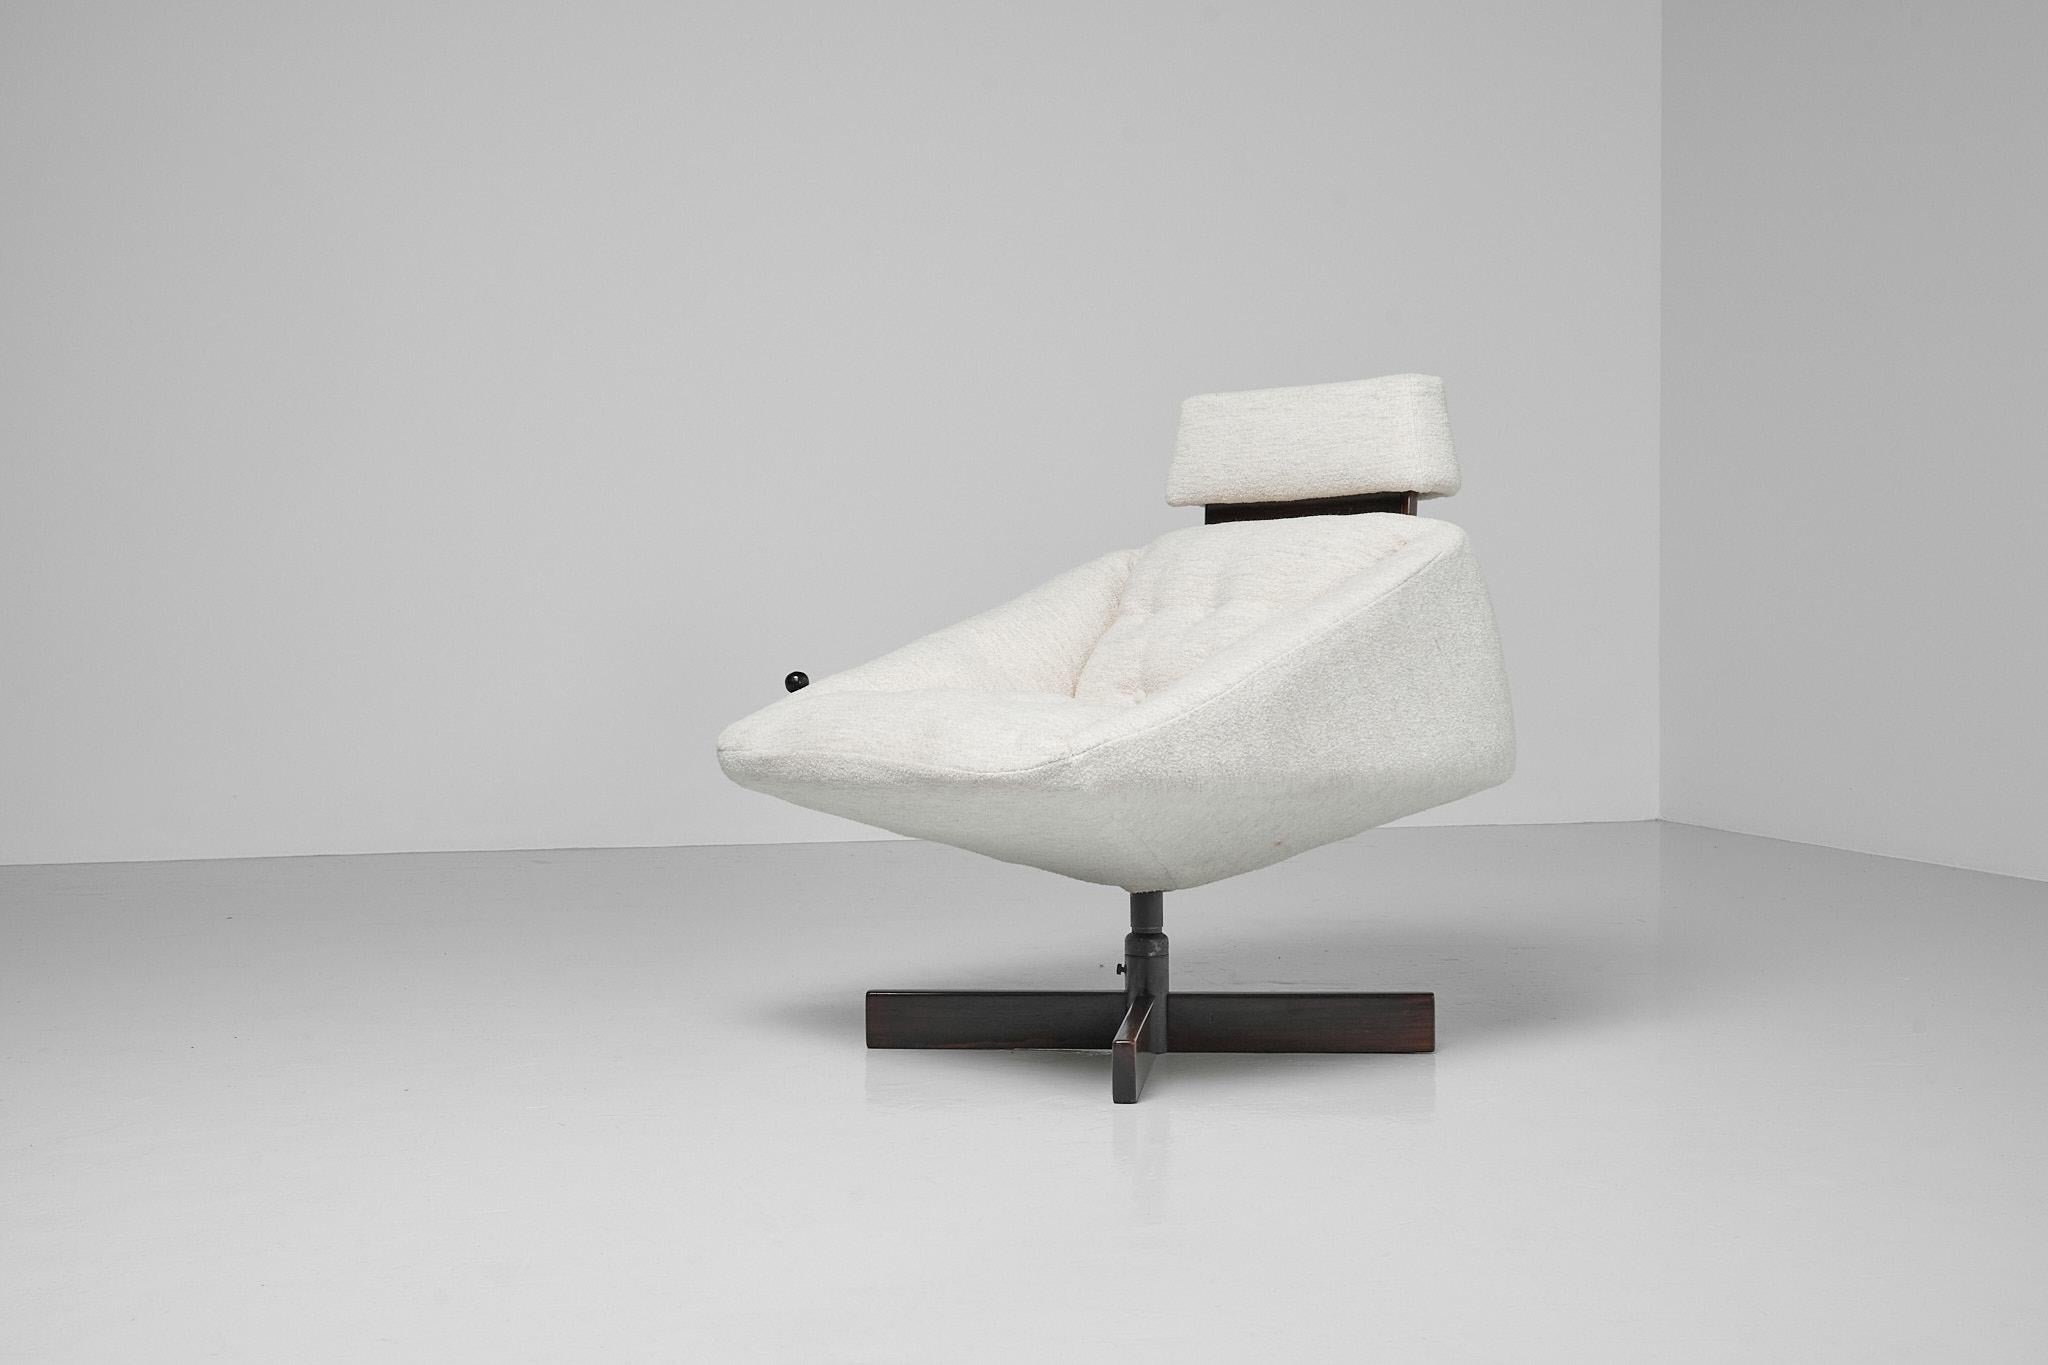 Fantastic shaped adjustable lounge chair designed by Percival Lafer and manufactured by MP Lafer, Brazil 1970s. This unusual, puffy shaped lounge chair has very nice characteristic lines. The design features a bulky seating part which angles nicely